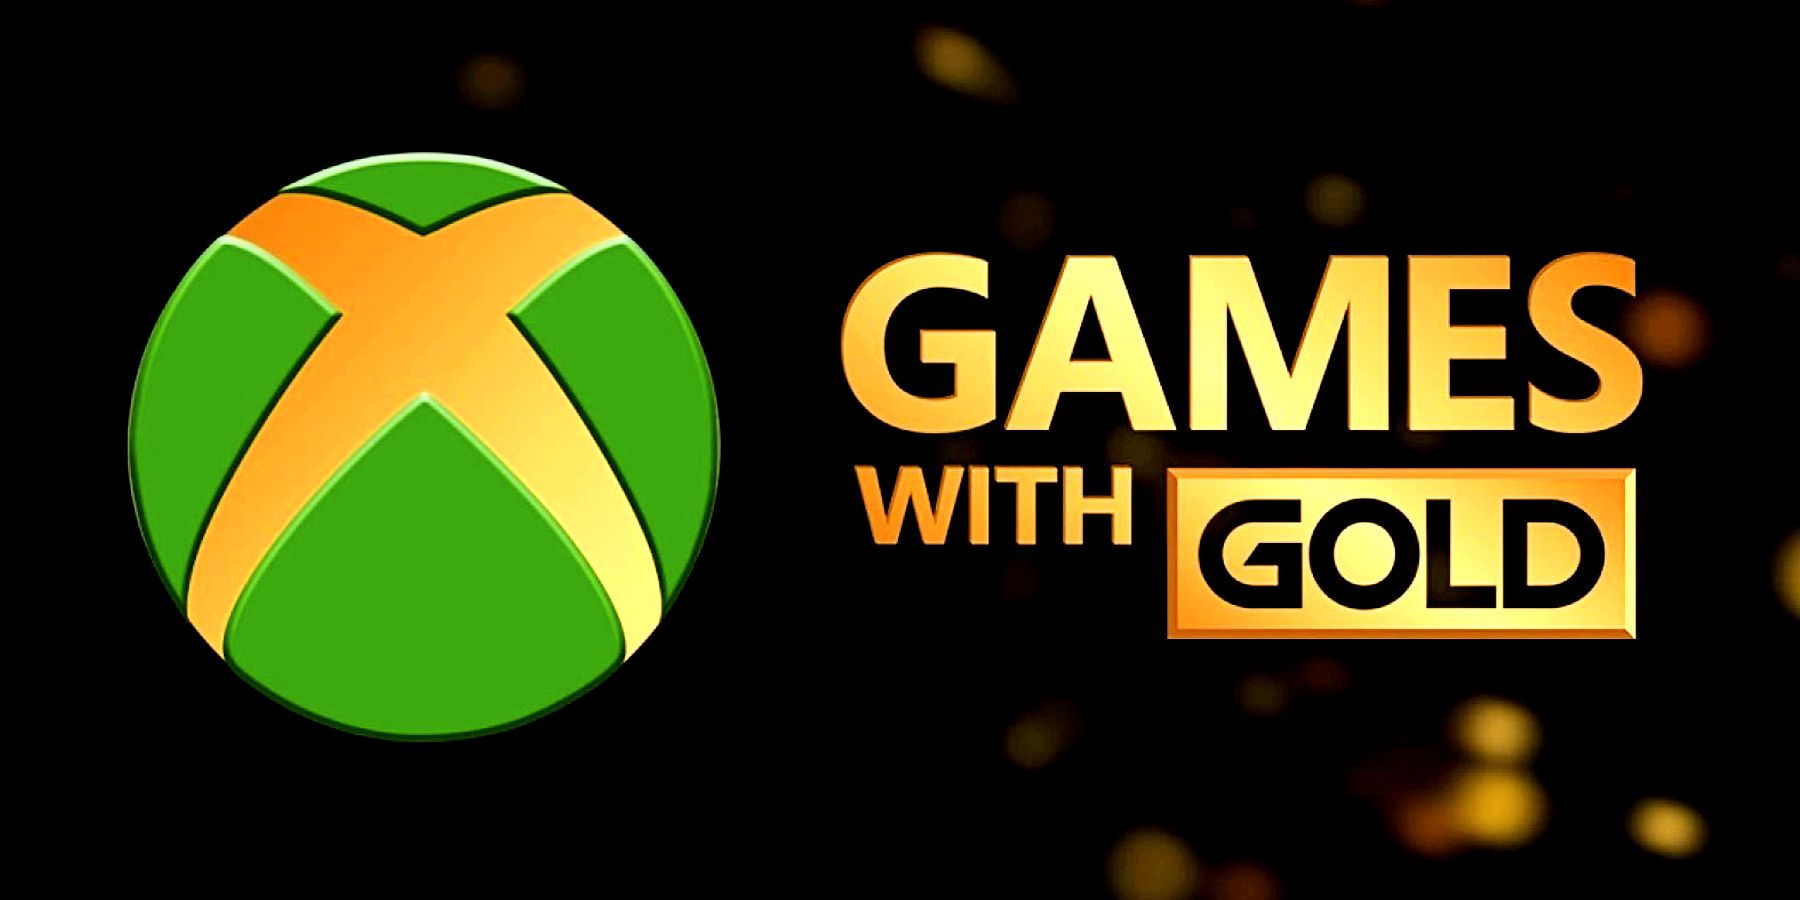 Free April games for Xbox games are now available with Gold